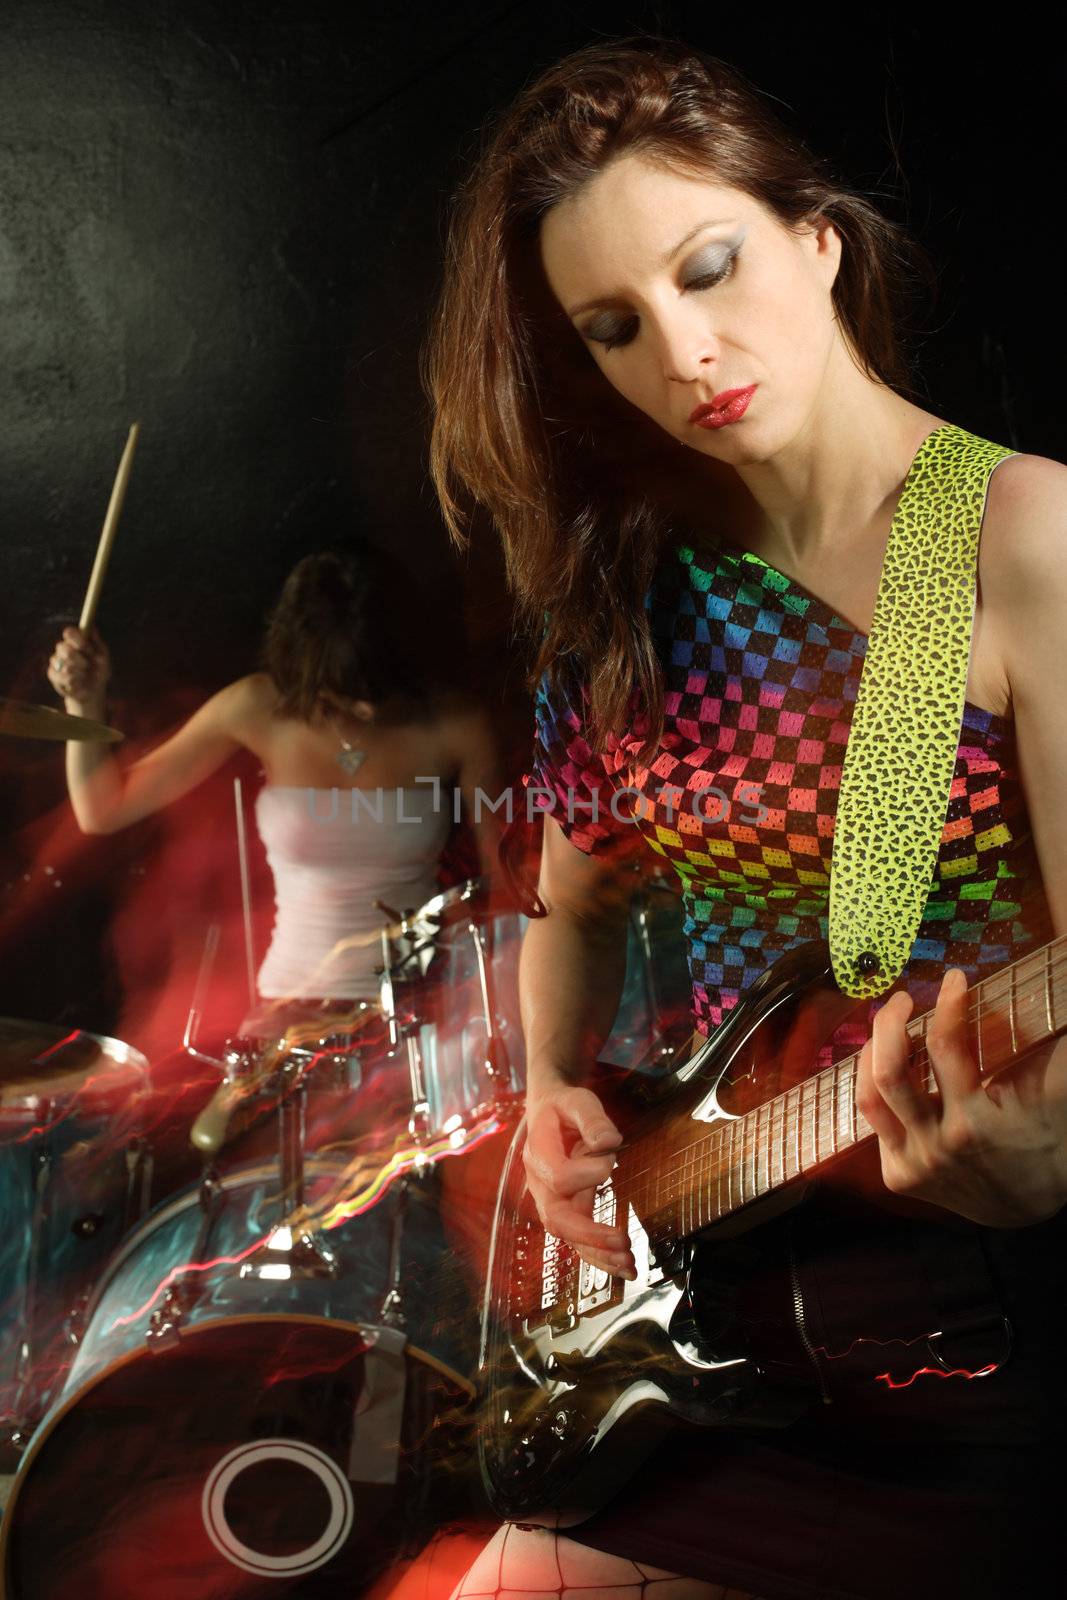 Photo of a female guitarist playing on a stage. Shot with strobes and slow shutter speed to create lighting atmosphere and blur effects. Slight motion blur on performer.